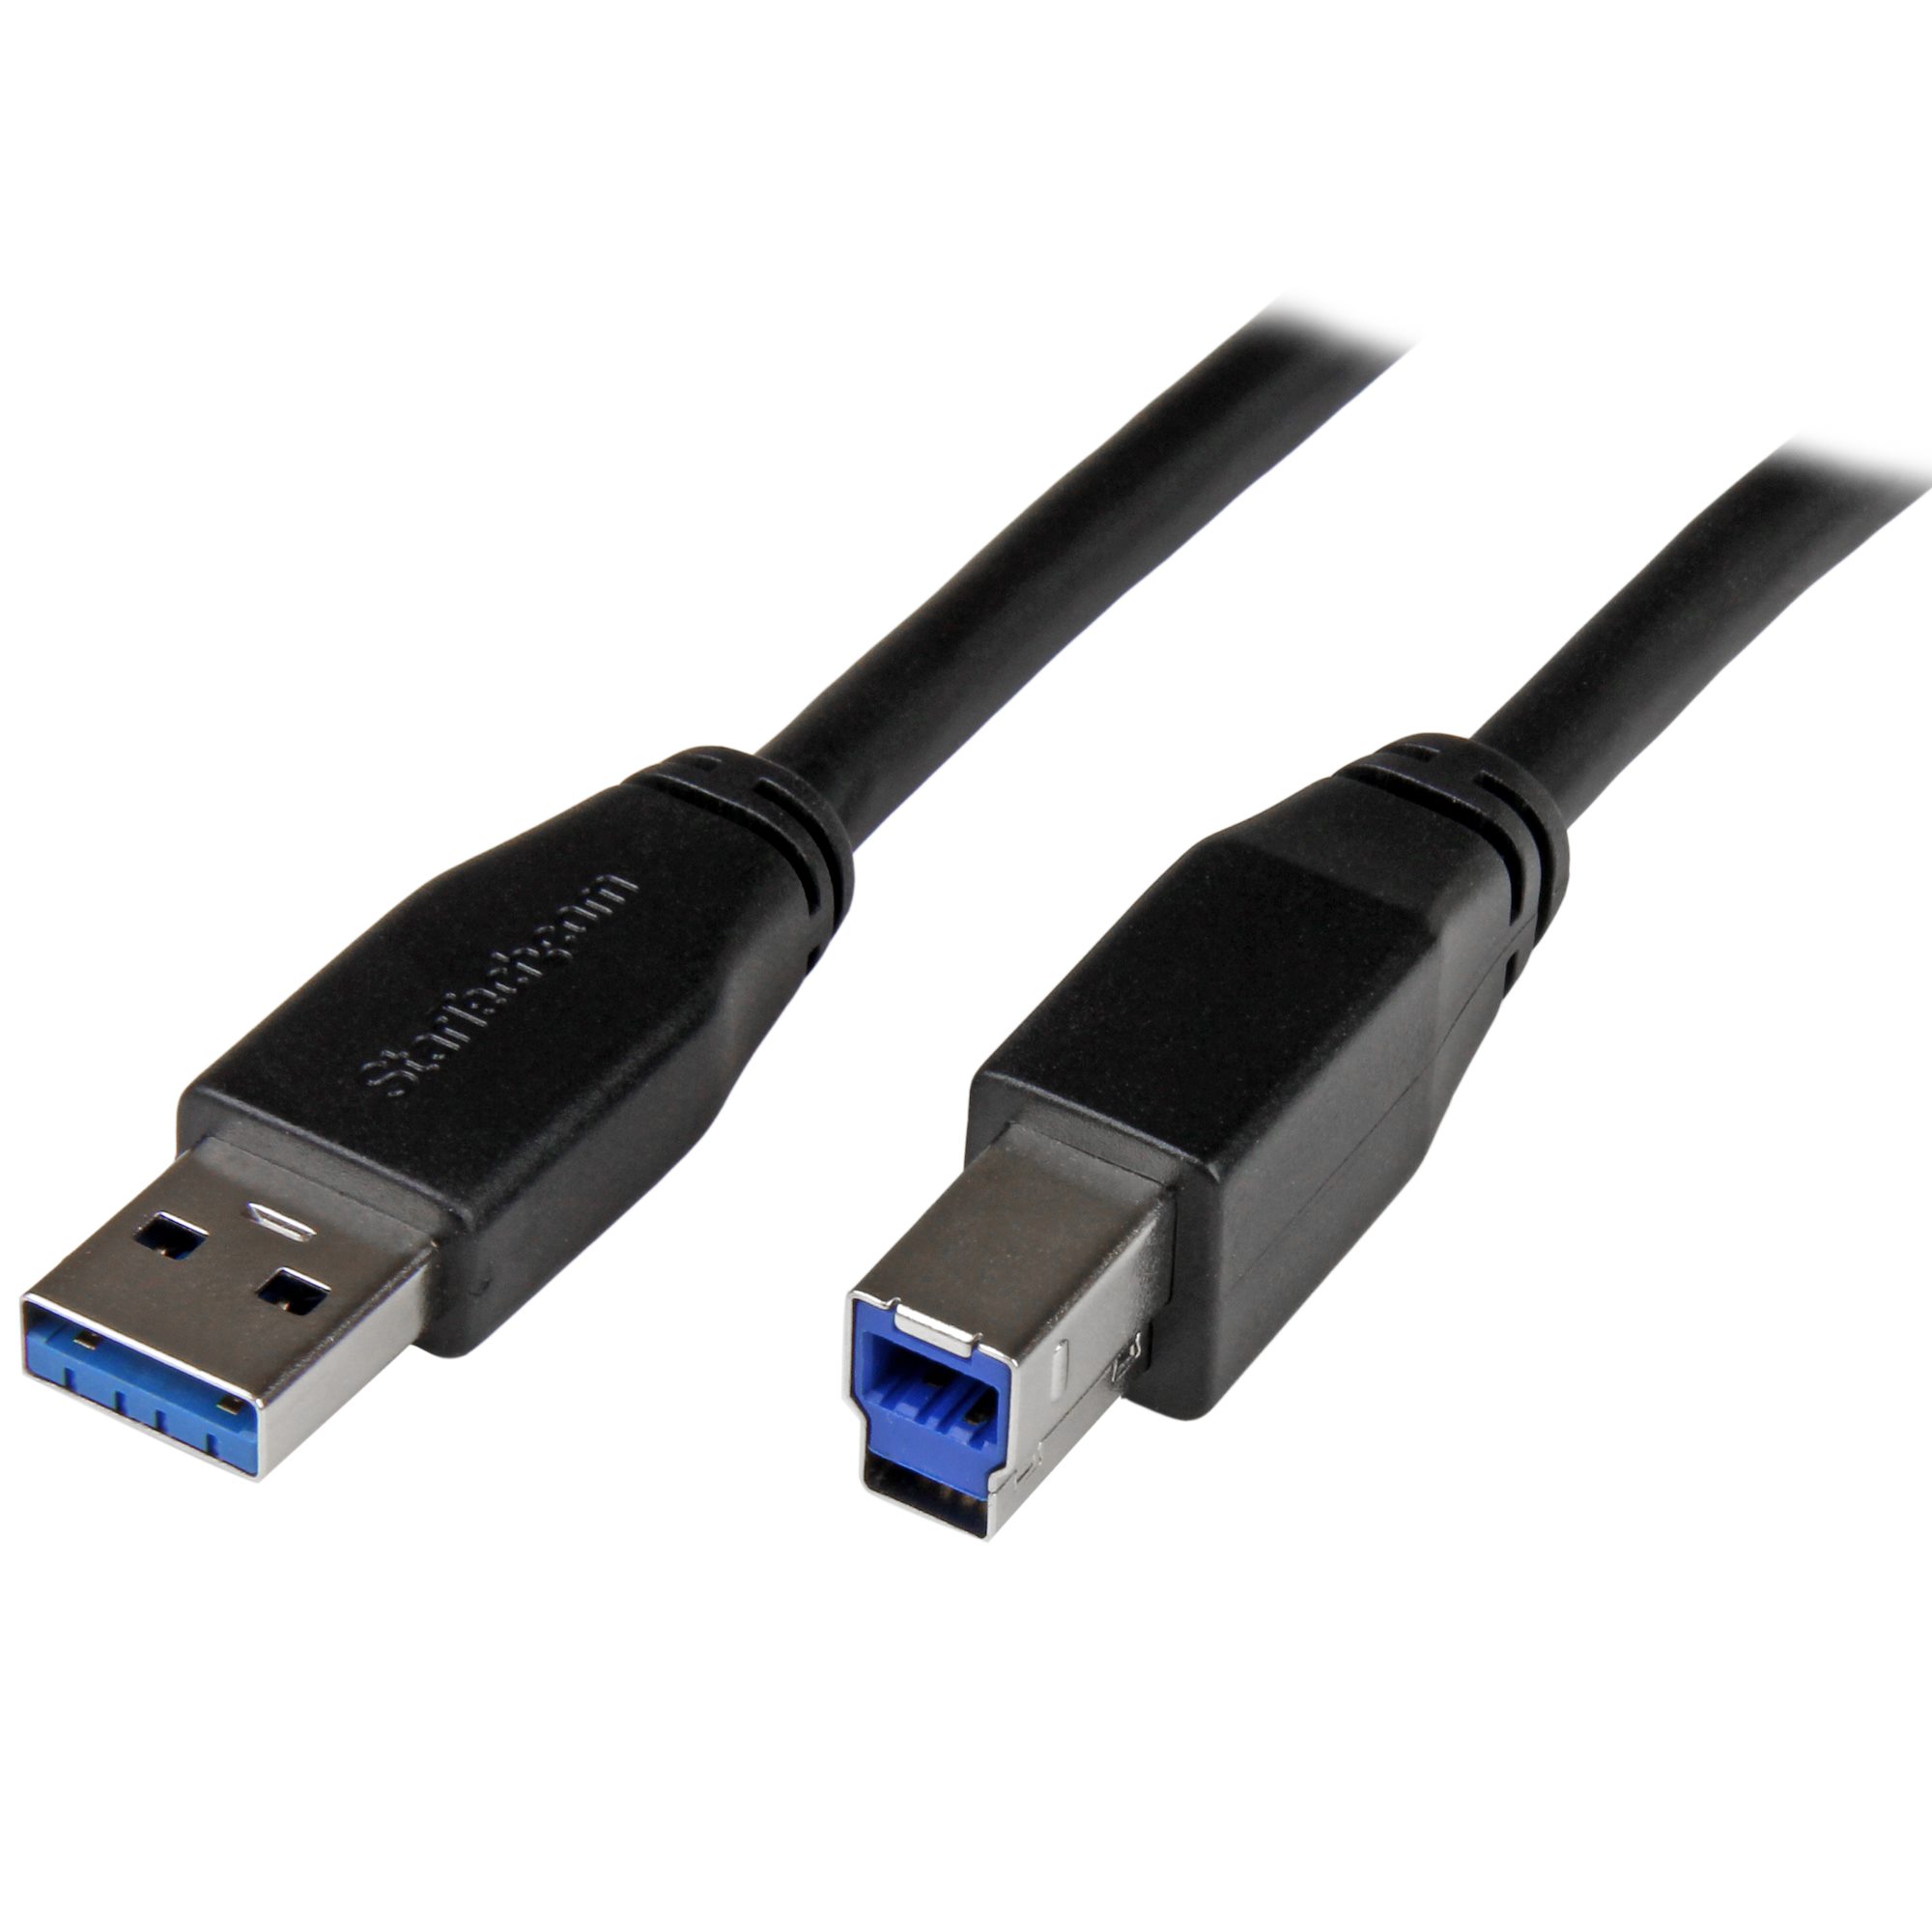 30ft Active USB 3.0 USB-A to USB-B Cable - USB Cables |